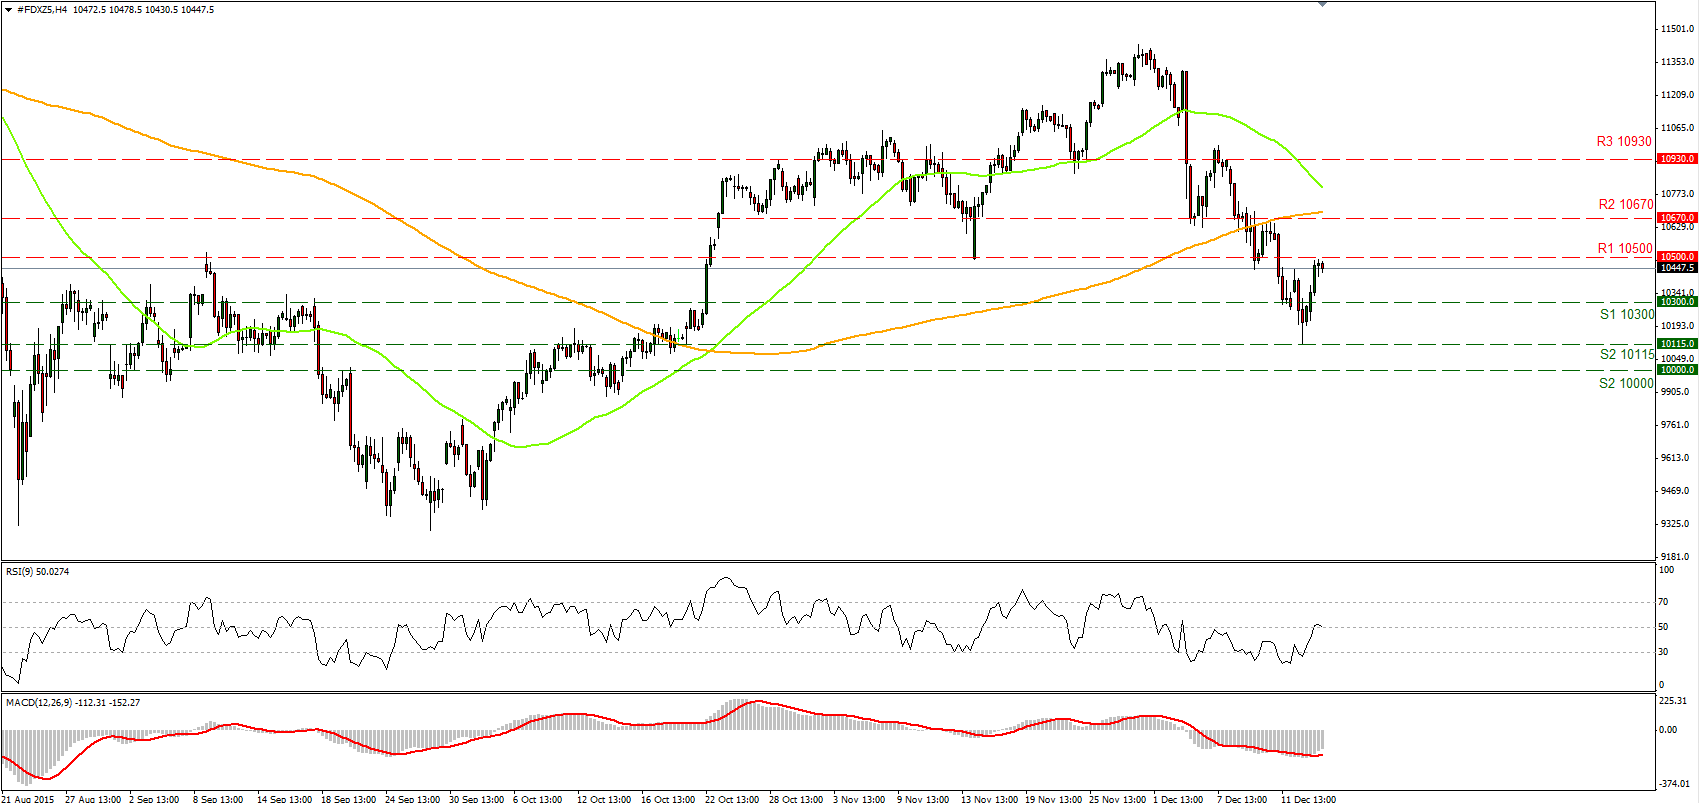 DAX Futures 4 Hourly Chart